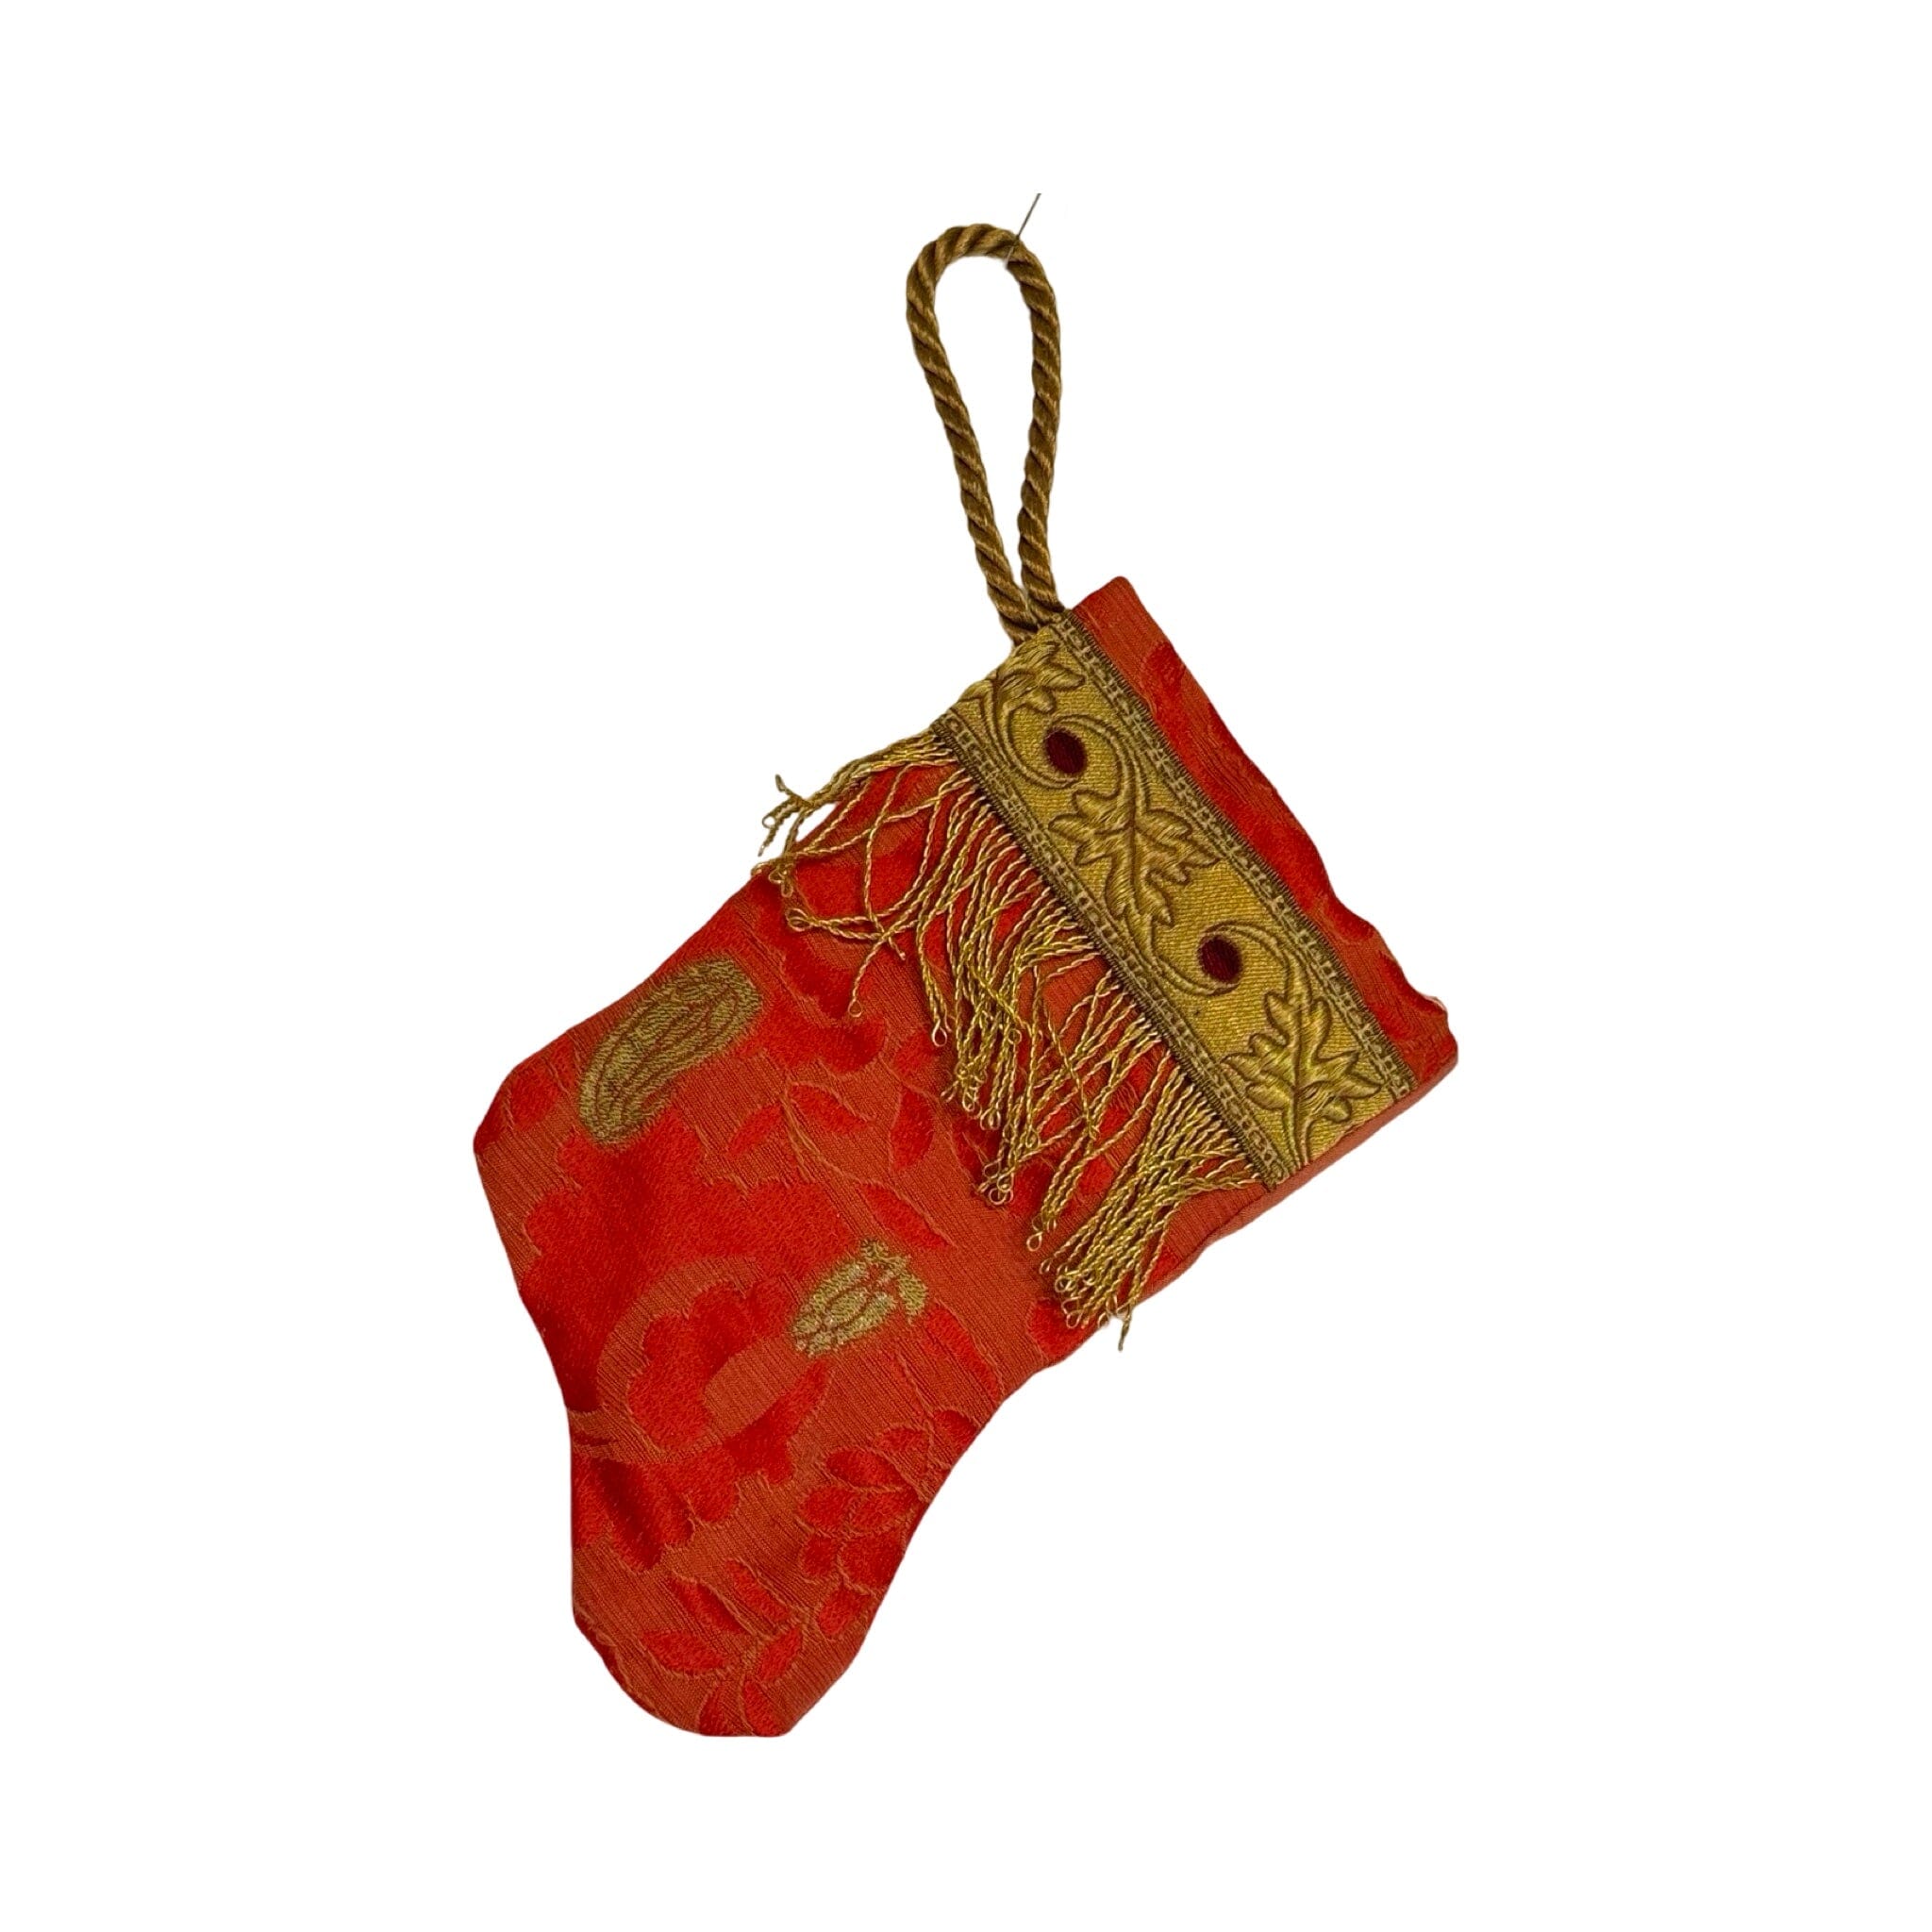 Handmade Mini Stocking Made From Vintage Fabric and Trims- Red and Gold Ornament B. Viz Design E 